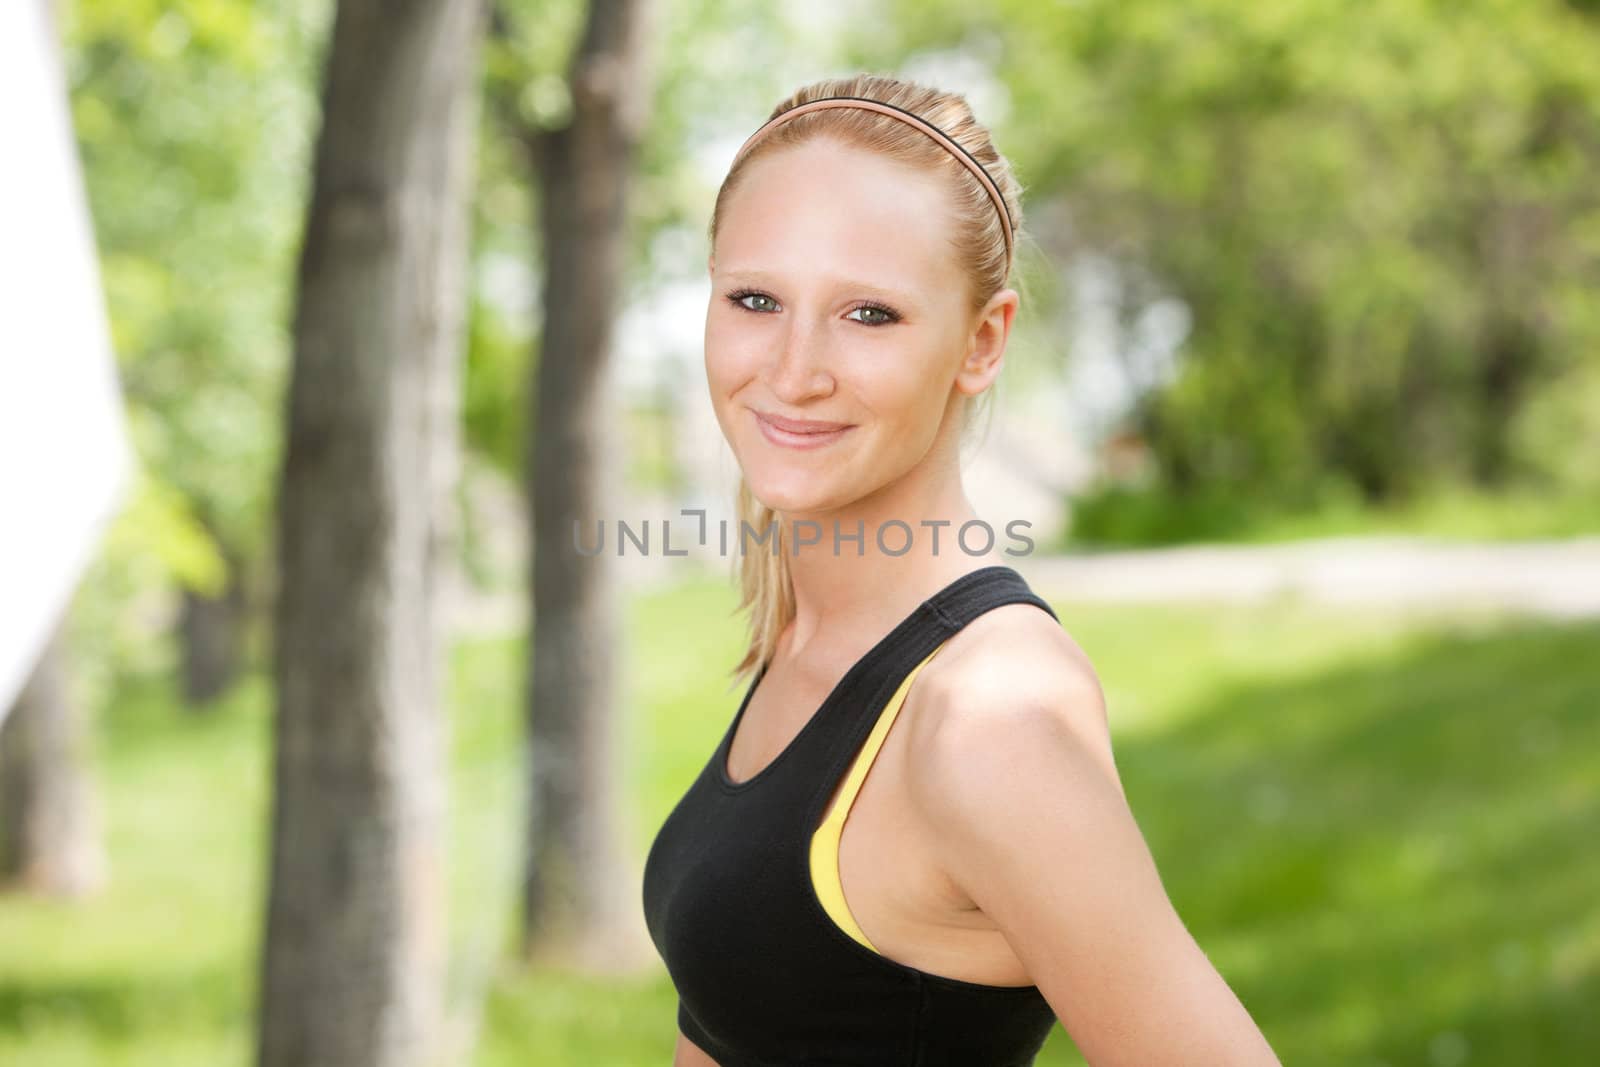 Beautiful woman smiling against blur background